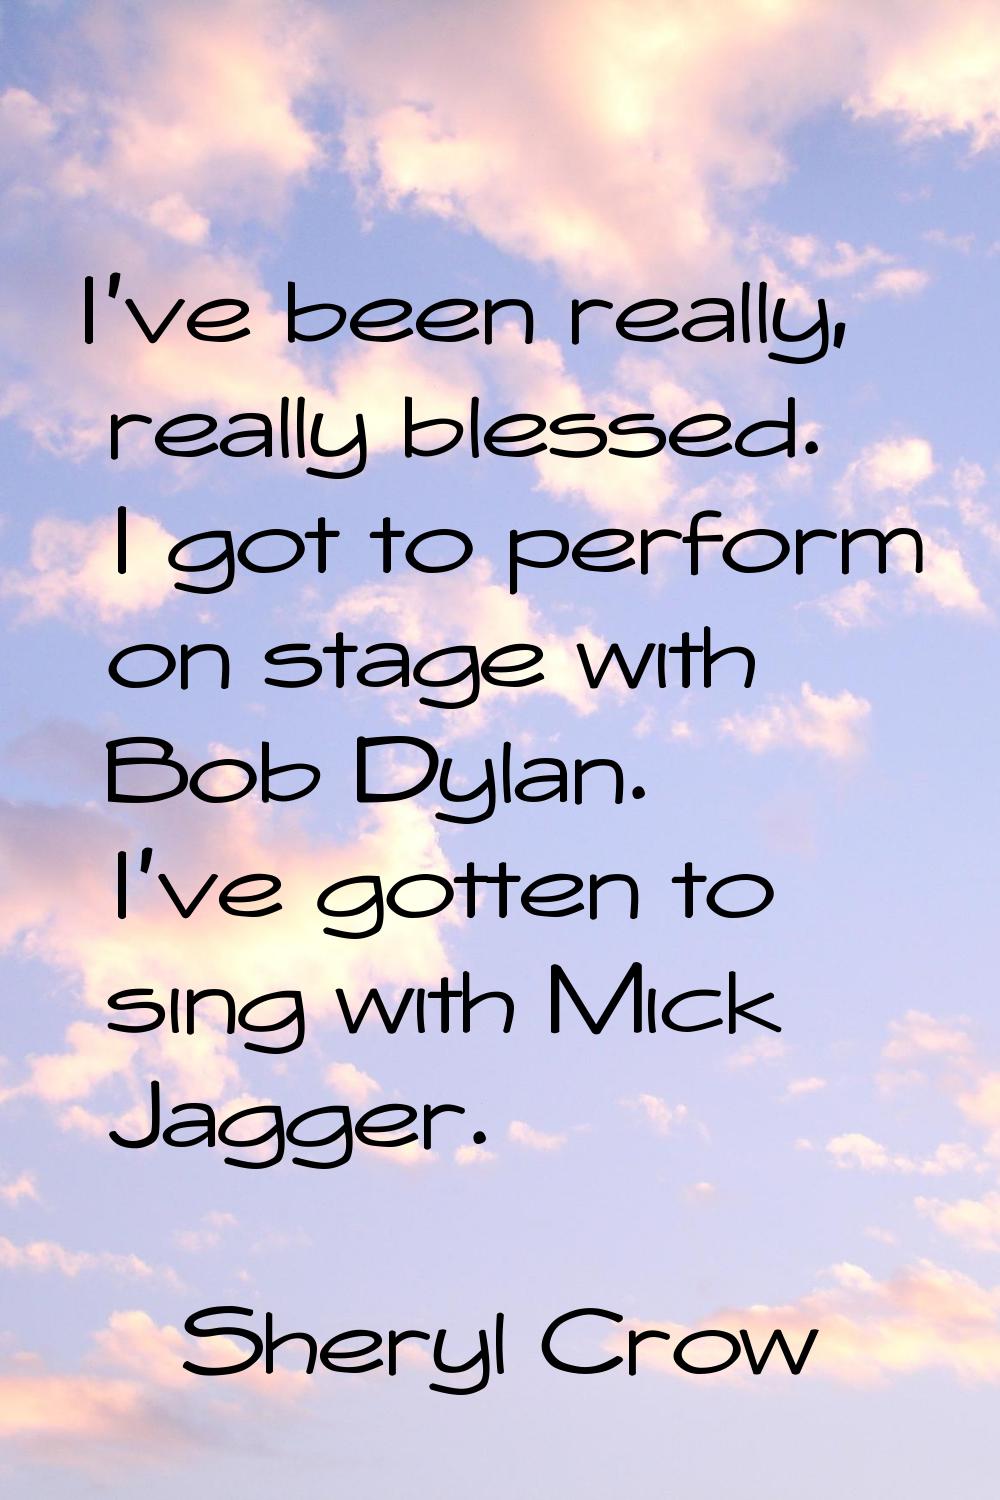 I've been really, really blessed. I got to perform on stage with Bob Dylan. I've gotten to sing wit